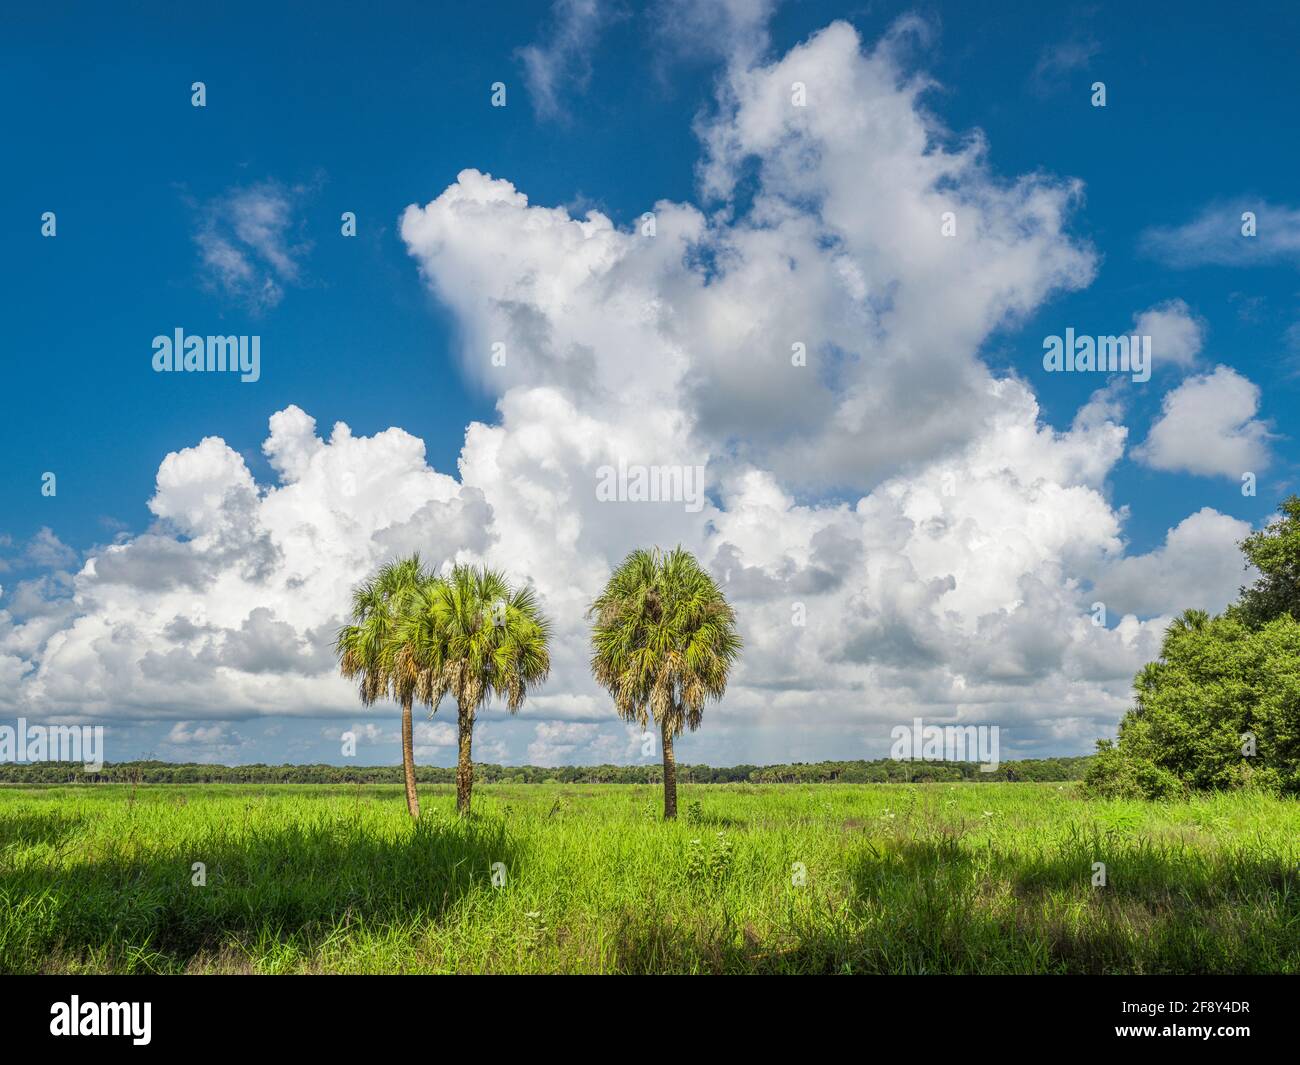 Summer landscape with cumulonimbus clouds over grassfield with palm trees, Myakka River State Park, Sarasota, Florida, USA Stock Photo